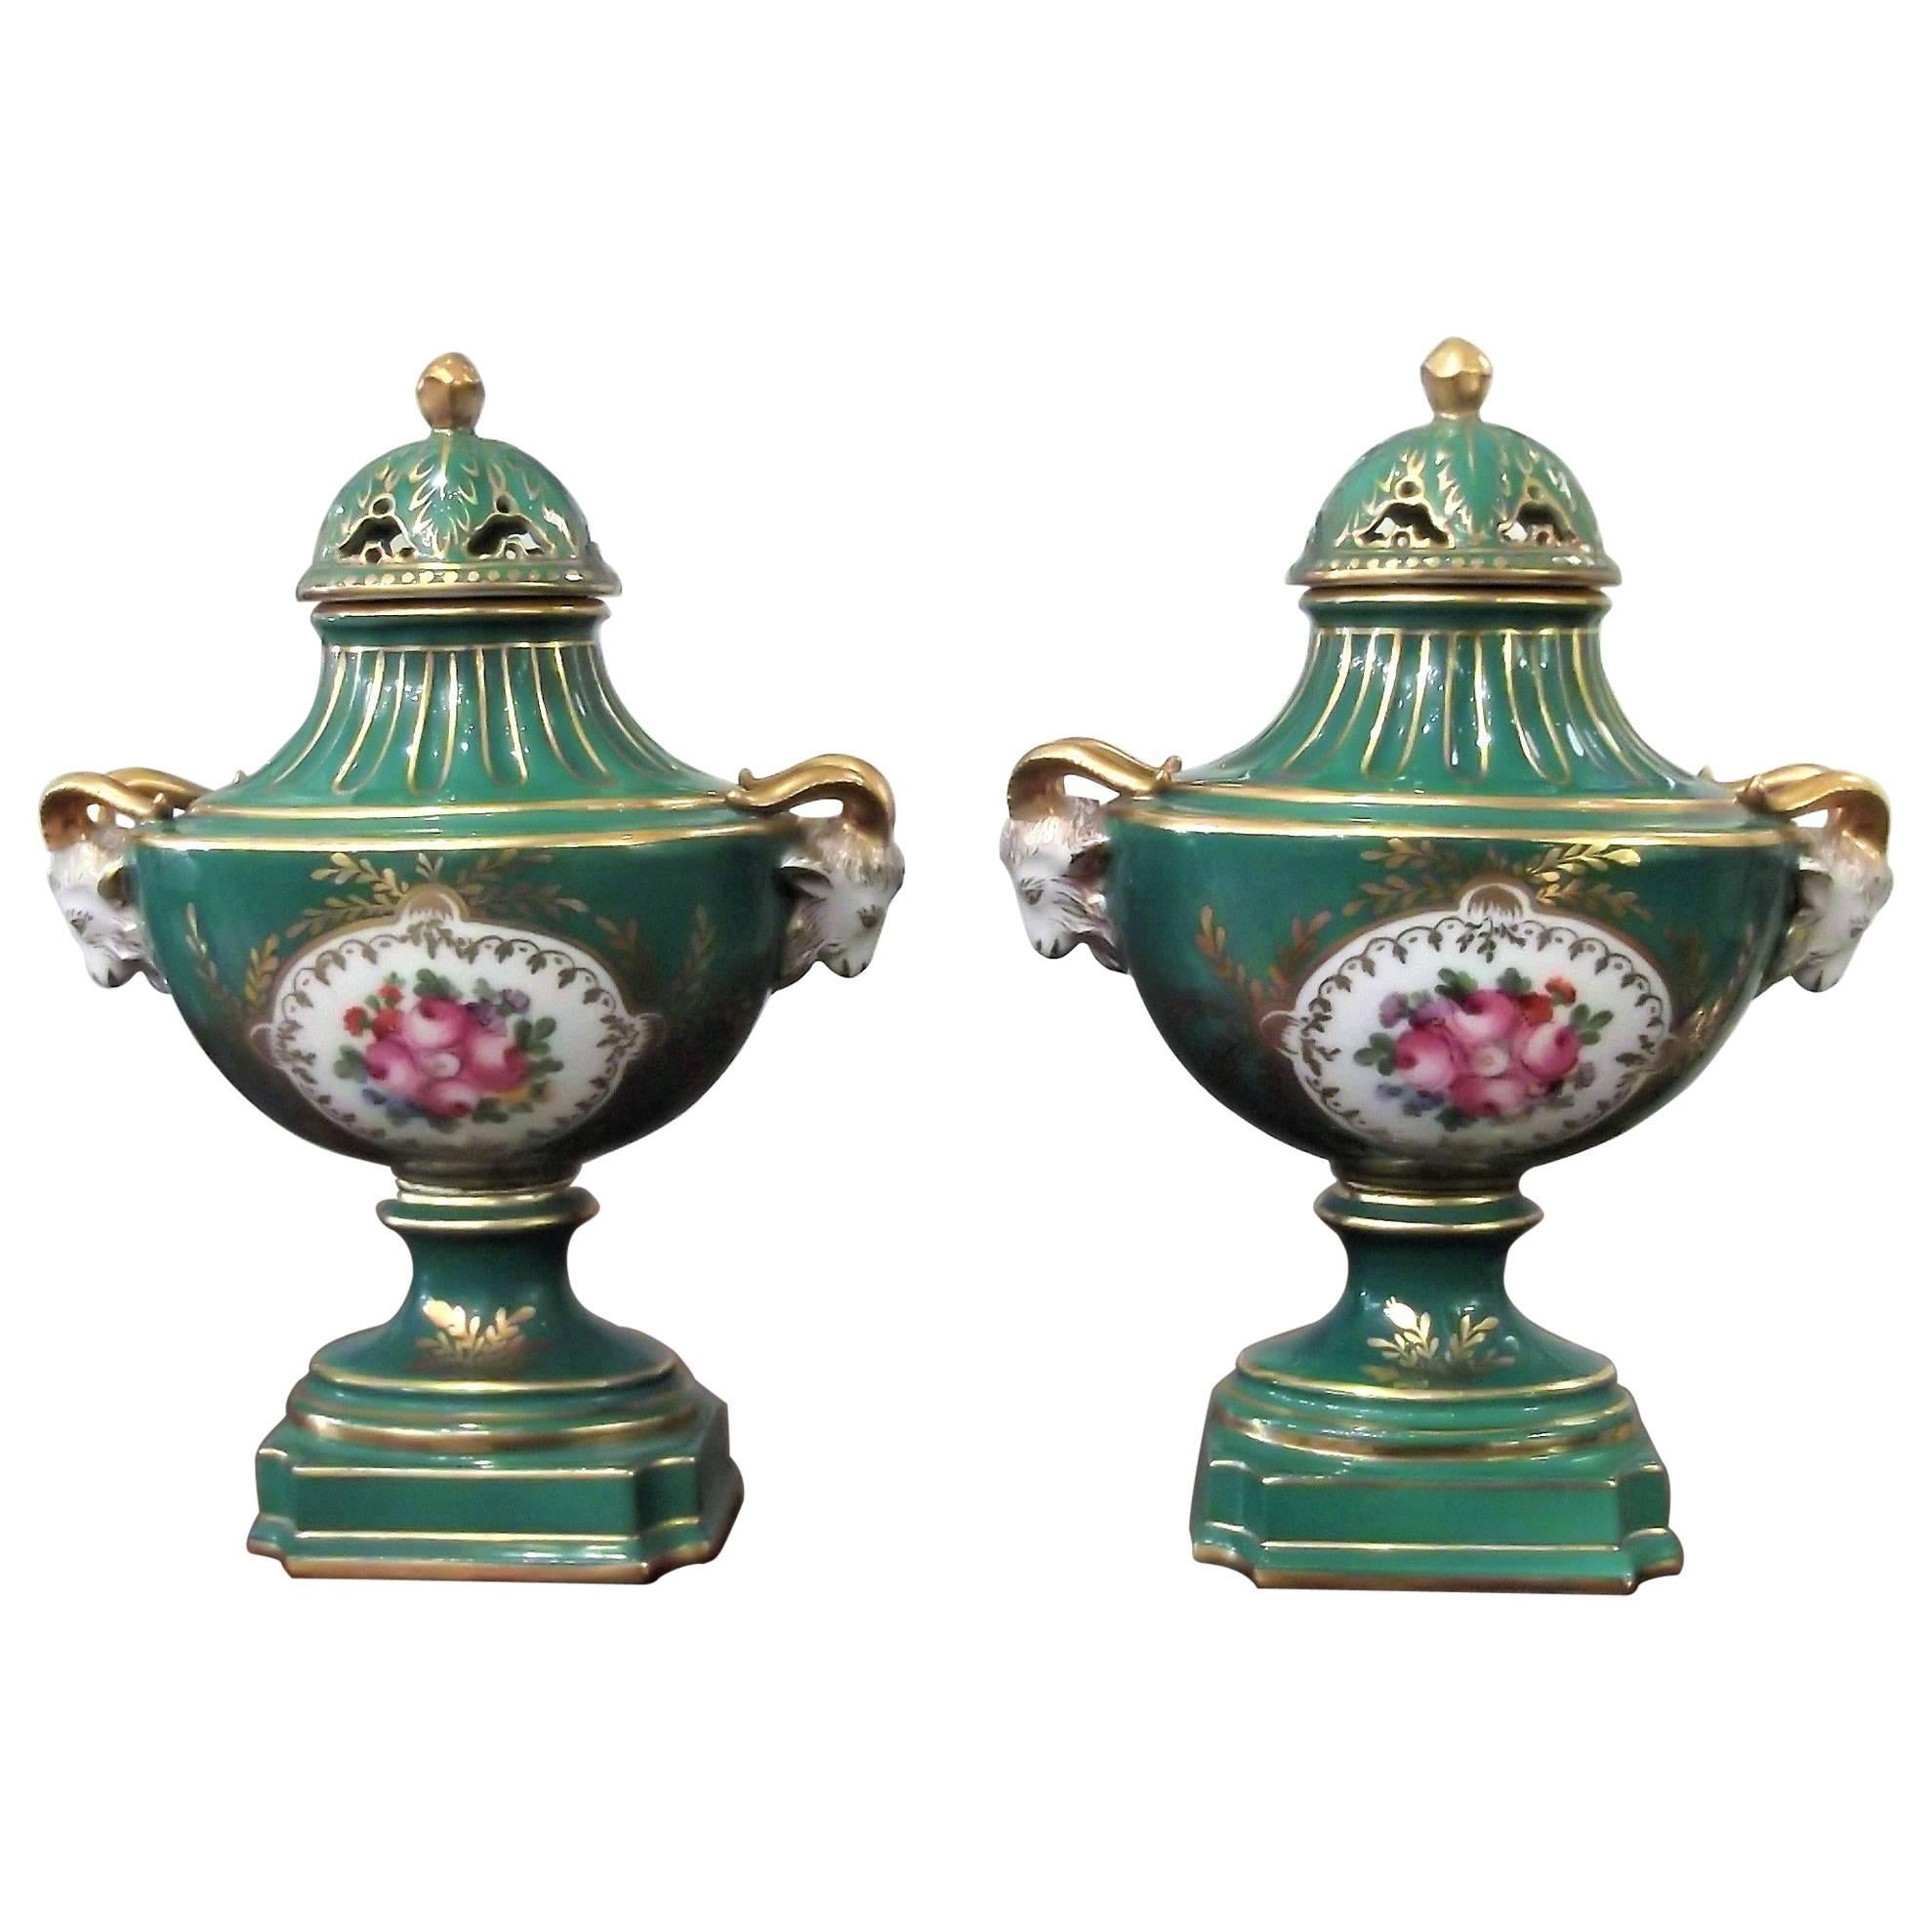 Pair of Dresden Hand-Painted Porcelain Urns